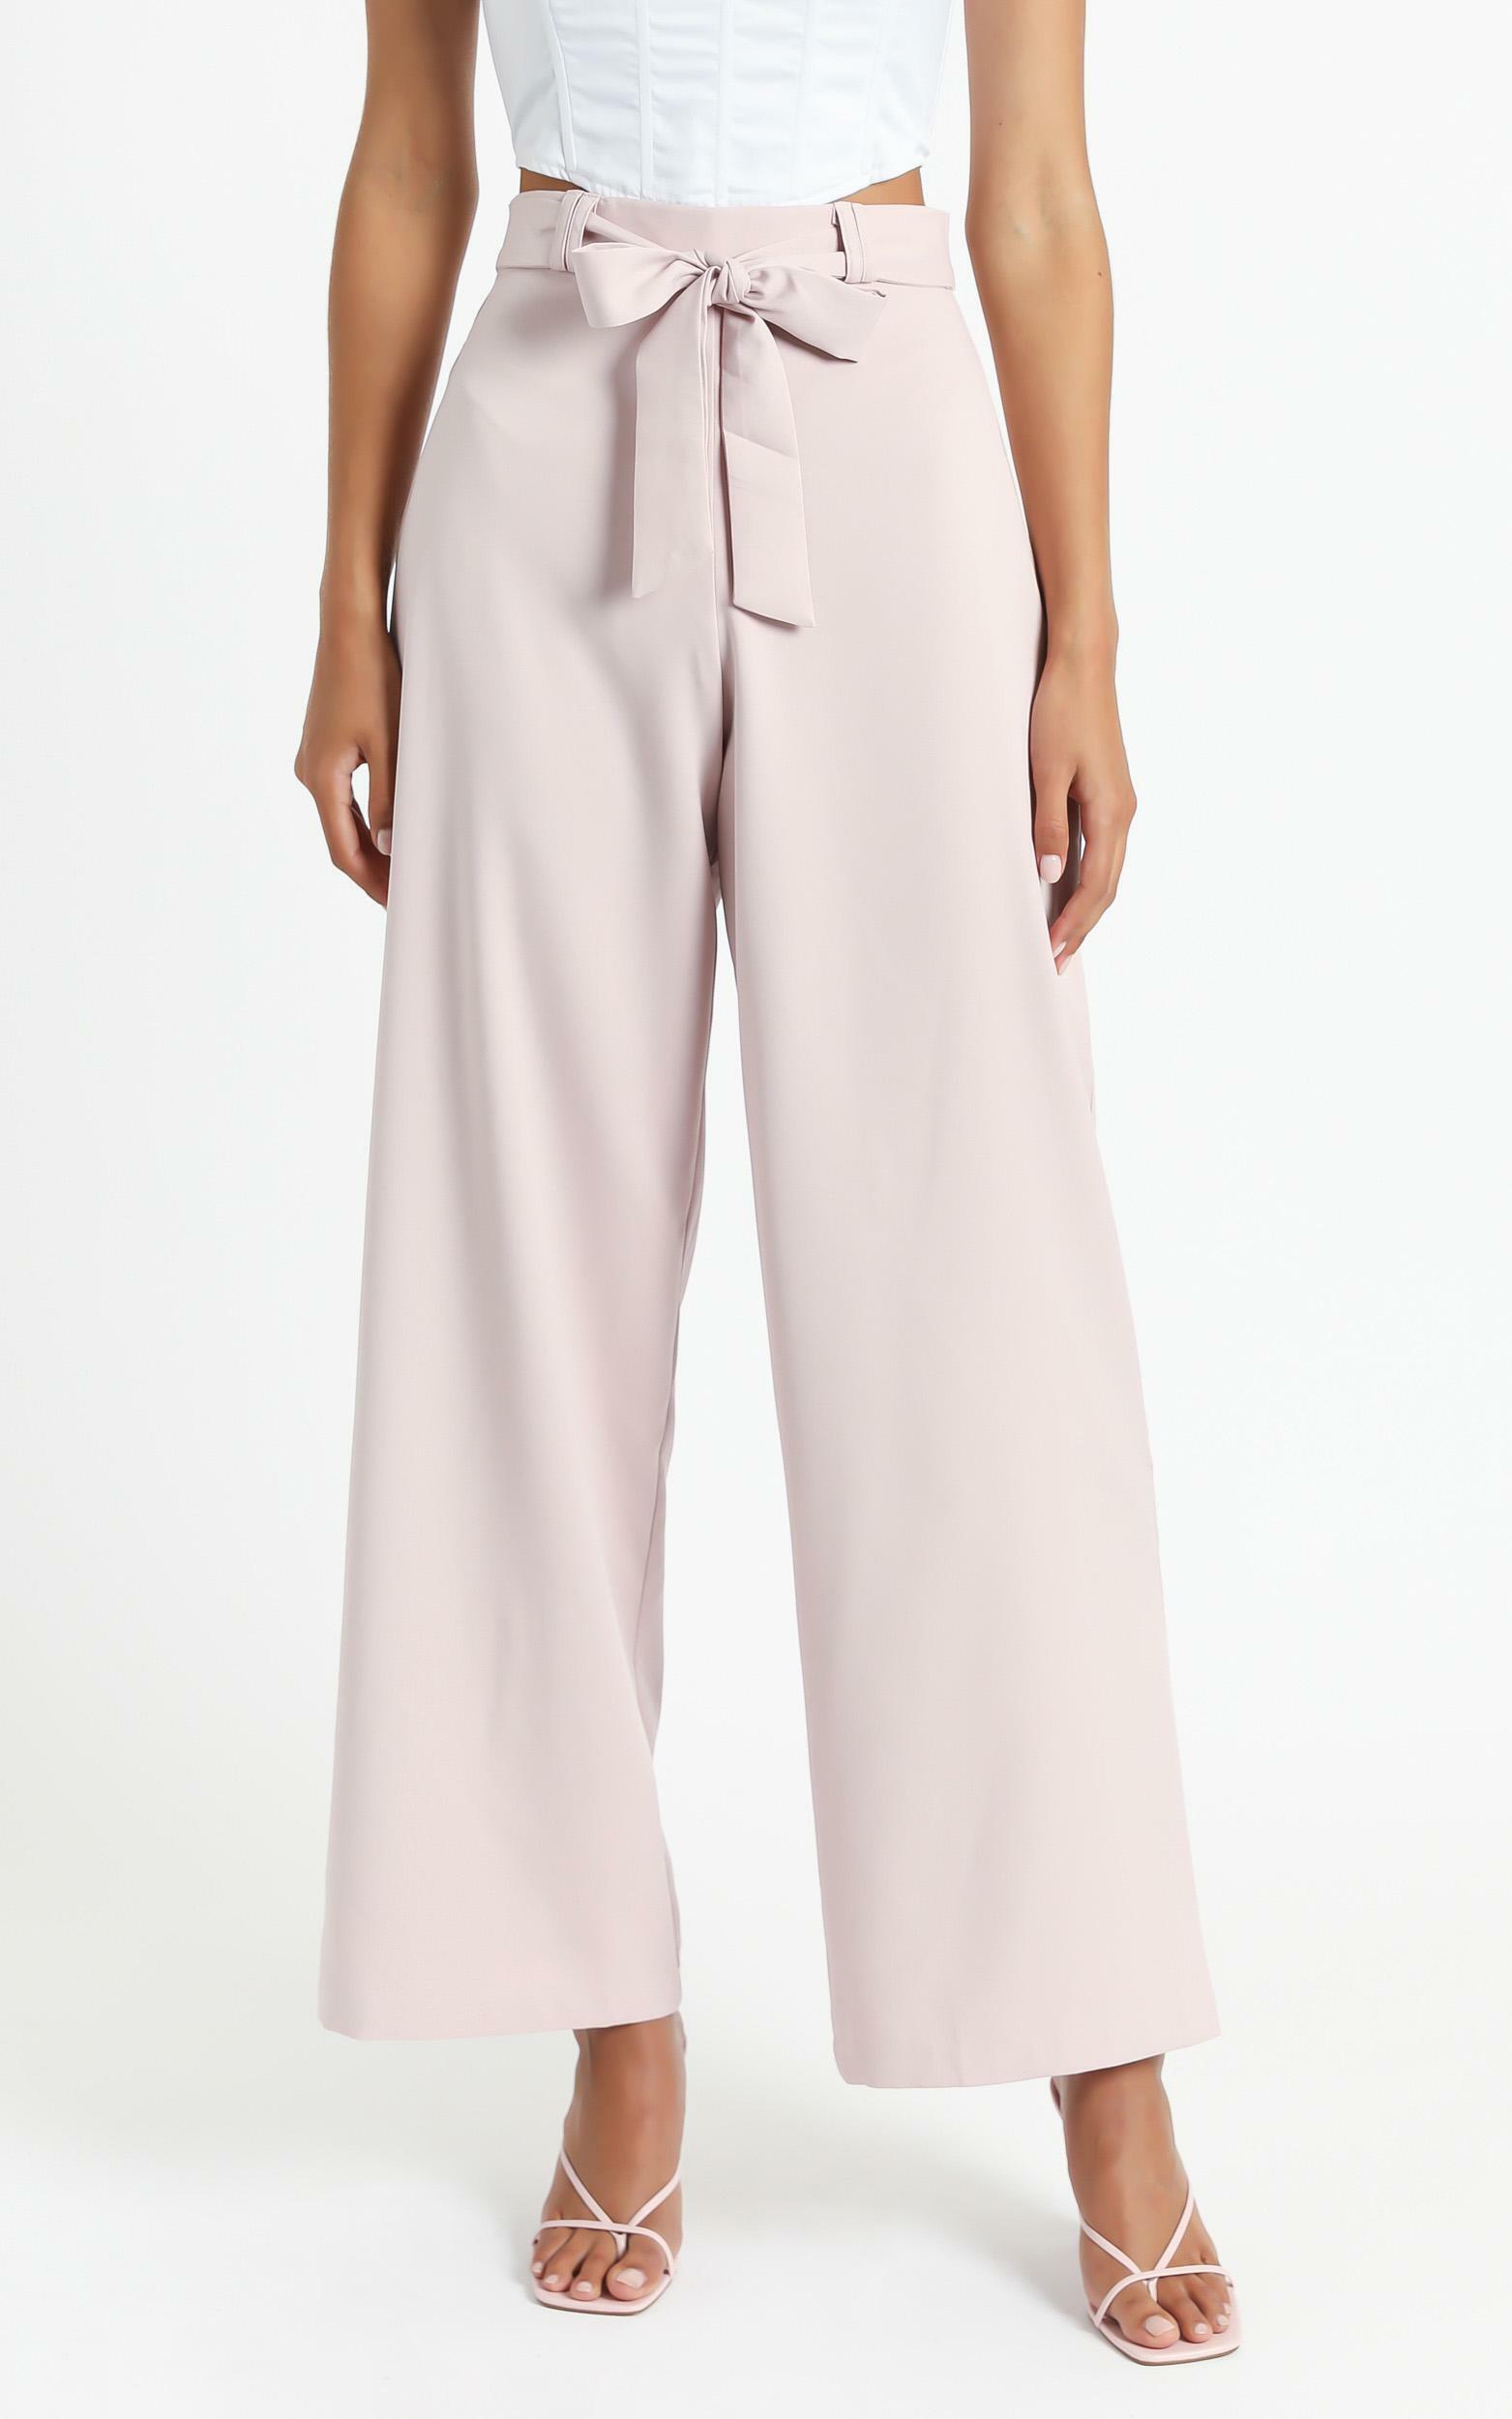 Miss Gold Pants in Blush - 06, PNK2, hi-res image number null